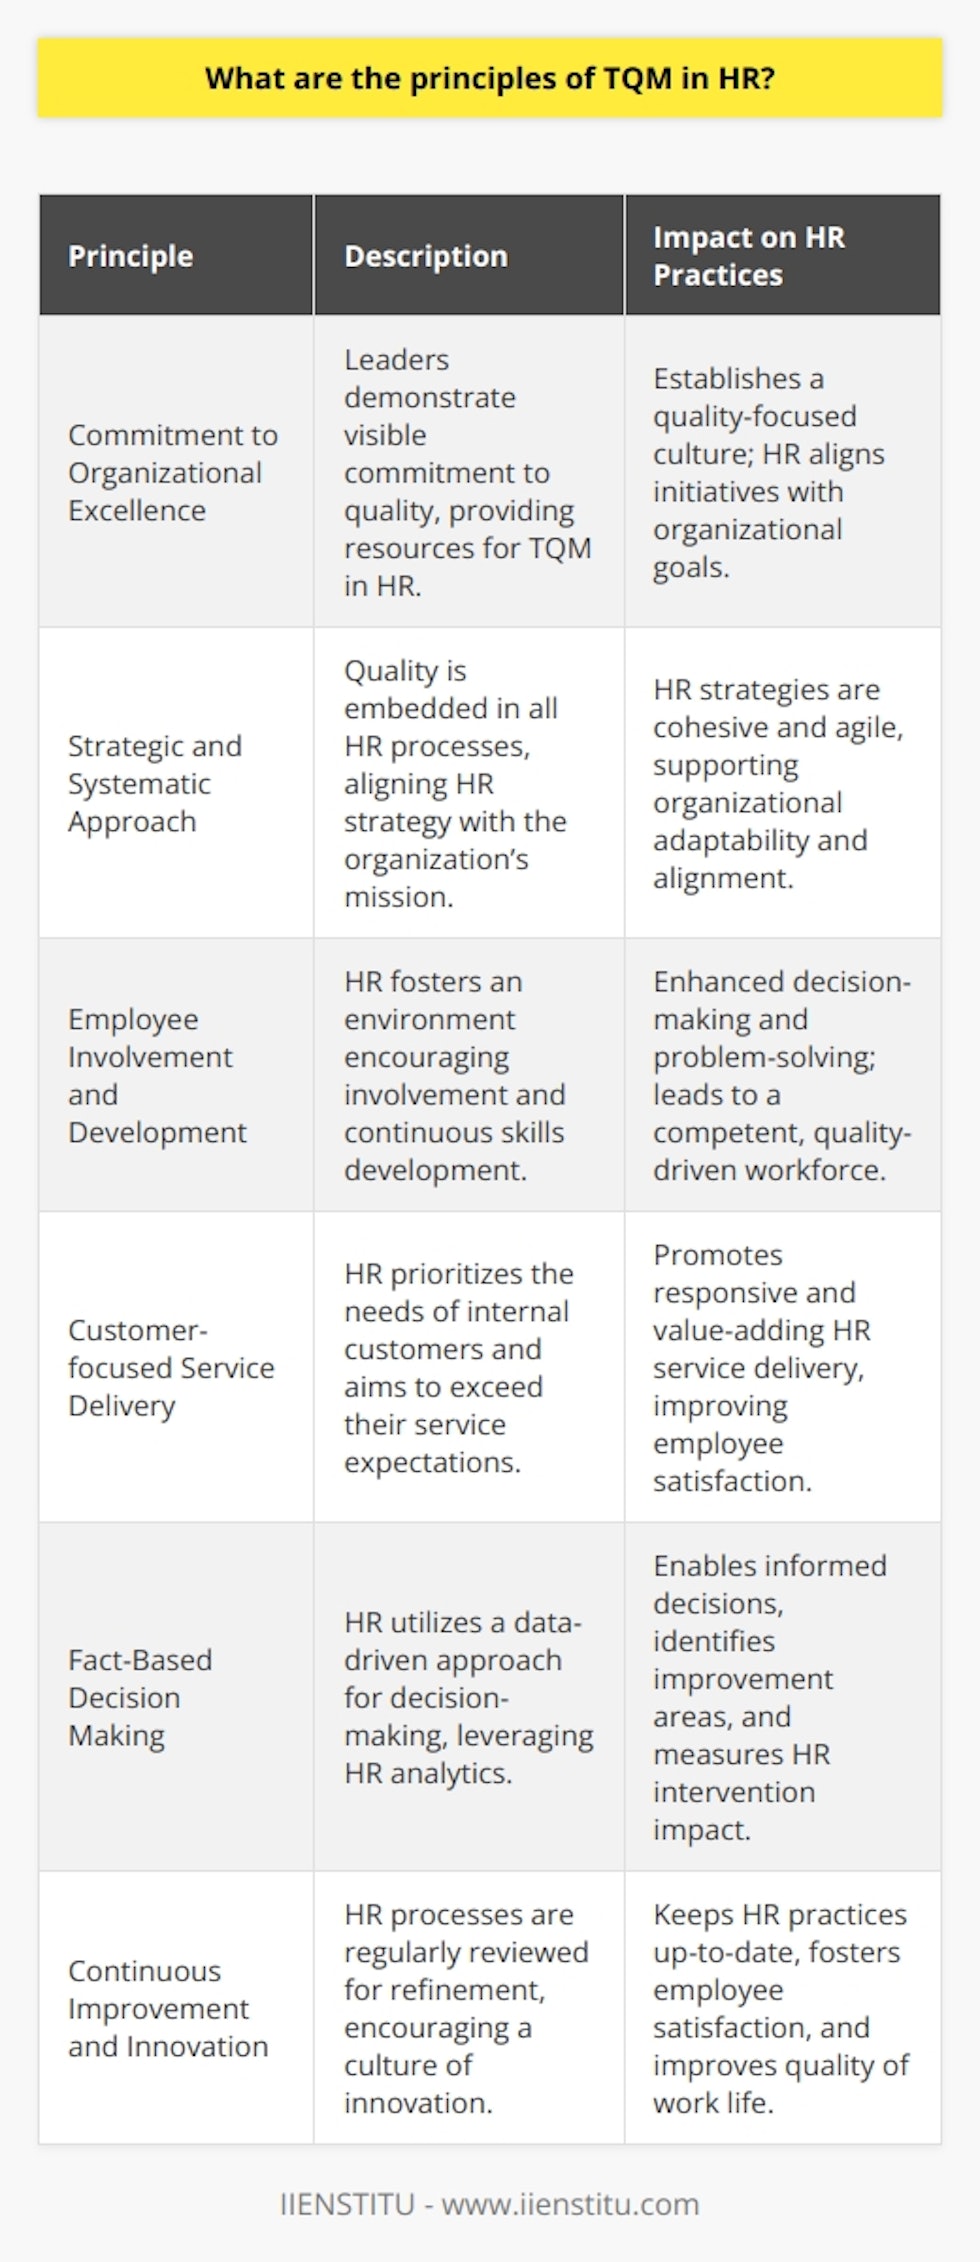 The principles of Total Quality Management (TQM) in Human Resources (HR) serve as a benchmark for exemplifying excellence in HR practices and aligning them with the overall strategic mission of an organization. These principles help create a workforce that is not only efficient and effective but also committed to quality in every aspect of its operations. To implement TQM effectively in HR, the following principles should be the cornerstone of the HR strategy.Commitment to Organizational ExcellenceLeadership commitment is vital when integrating TQM into HR. The organization's leaders must be visibly committed to achieving excellence. This means advocating for quality improvement initiatives and providing the necessary resources and support to implement TQM practices. There should be a shared vision for quality that permeates through all levels of the organization, and HR leaders play an essential role in shaping and maintaining this vision.Strategic and Systematic ApproachA systematic approach to HR management ensures that all processes are designed, managed, and improved with quality in mind. HR strategies must align with the overall strategic plan of the organization, integrating TQM into each step, from talent acquisition to development and retention strategies. HR needs to ensure that its practices support the organization’s goals and are agile enough to adapt to new challenges and opportunities. Employee Involvement and DevelopmentCentral to the TQM philosophy is the belief that employees are the core asset of the organization. In the context of HR, this translates to fostering an environment that encourages employee involvement in decision-making and problem-solving. HR should create opportunities for employees to develop skills which can lead to improvements within the organization. Continuous learning and professional development should be emphasized, ensuring that the workforce is well-equipped to maintain high-quality standards.Customer-focused Service DeliveryThe essence of TQM is to satisfy the customer's needs. While HR's customers are the employees and other internal stakeholders, providing them with quality service is paramount. HR must understand the needs of its internal customers and strive to meet or exceed their expectations. This means being responsive, providing prompt solutions to HR-related queries, and delivering services that add value to the employees’ work life.Fact-Based Decision MakingDecisions within HR under the TQM approach should be made using a data-driven methodology. HR professionals should collect and analyze data to understand trends, identifying areas that require improvement, and measure the effectiveness of HR interventions. This requires investing in HR analytics capabilities to make informed decisions that lead to continuous improvement.Continuous Improvement and InnovationContinuous improvement, a core principle of TQM, mandates that HR processes undergo regular review and refinement. HR should encourage a culture where ideas for improvement are welcomed and recognized. This keeps organizational processes up-to-date and responsive to changes in the workforce and the market. By championing innovation, HR can contribute to improving workflows, employee satisfaction, and ultimately the quality of work life within the organization.By embedding these principles into HR practice, an organization can ensure that its human resources are not only a support function but a strategic partner driving the business towards excellence. The adoption of TQM in HR can lead to a more engaged workforce, efficient HR operations, and a competitive edge in the market.